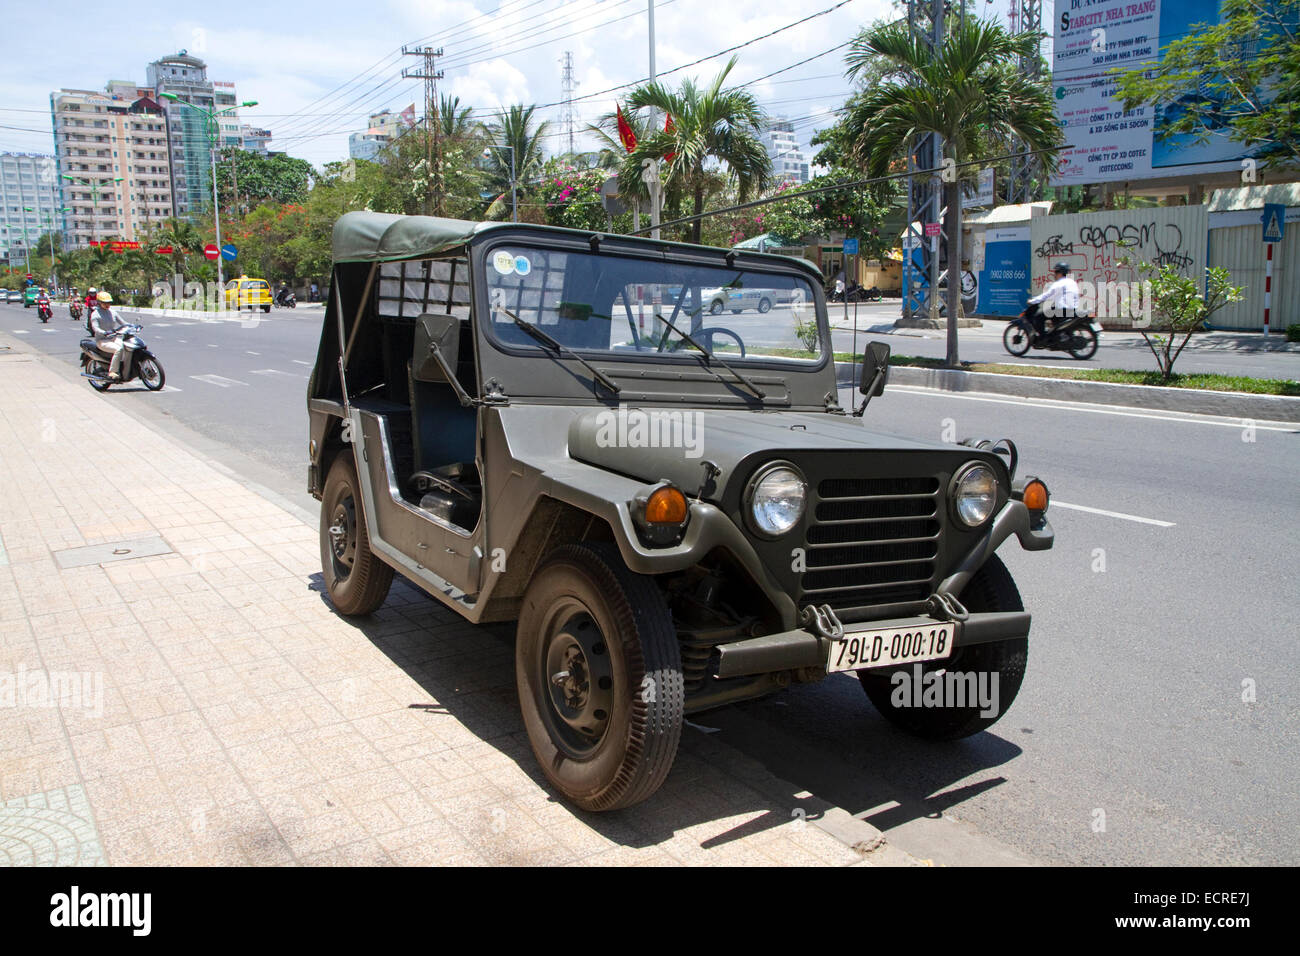 Vintage U.S. military jeep model M-151 on the street in Nha Trang, Vietnam. Stock Photo